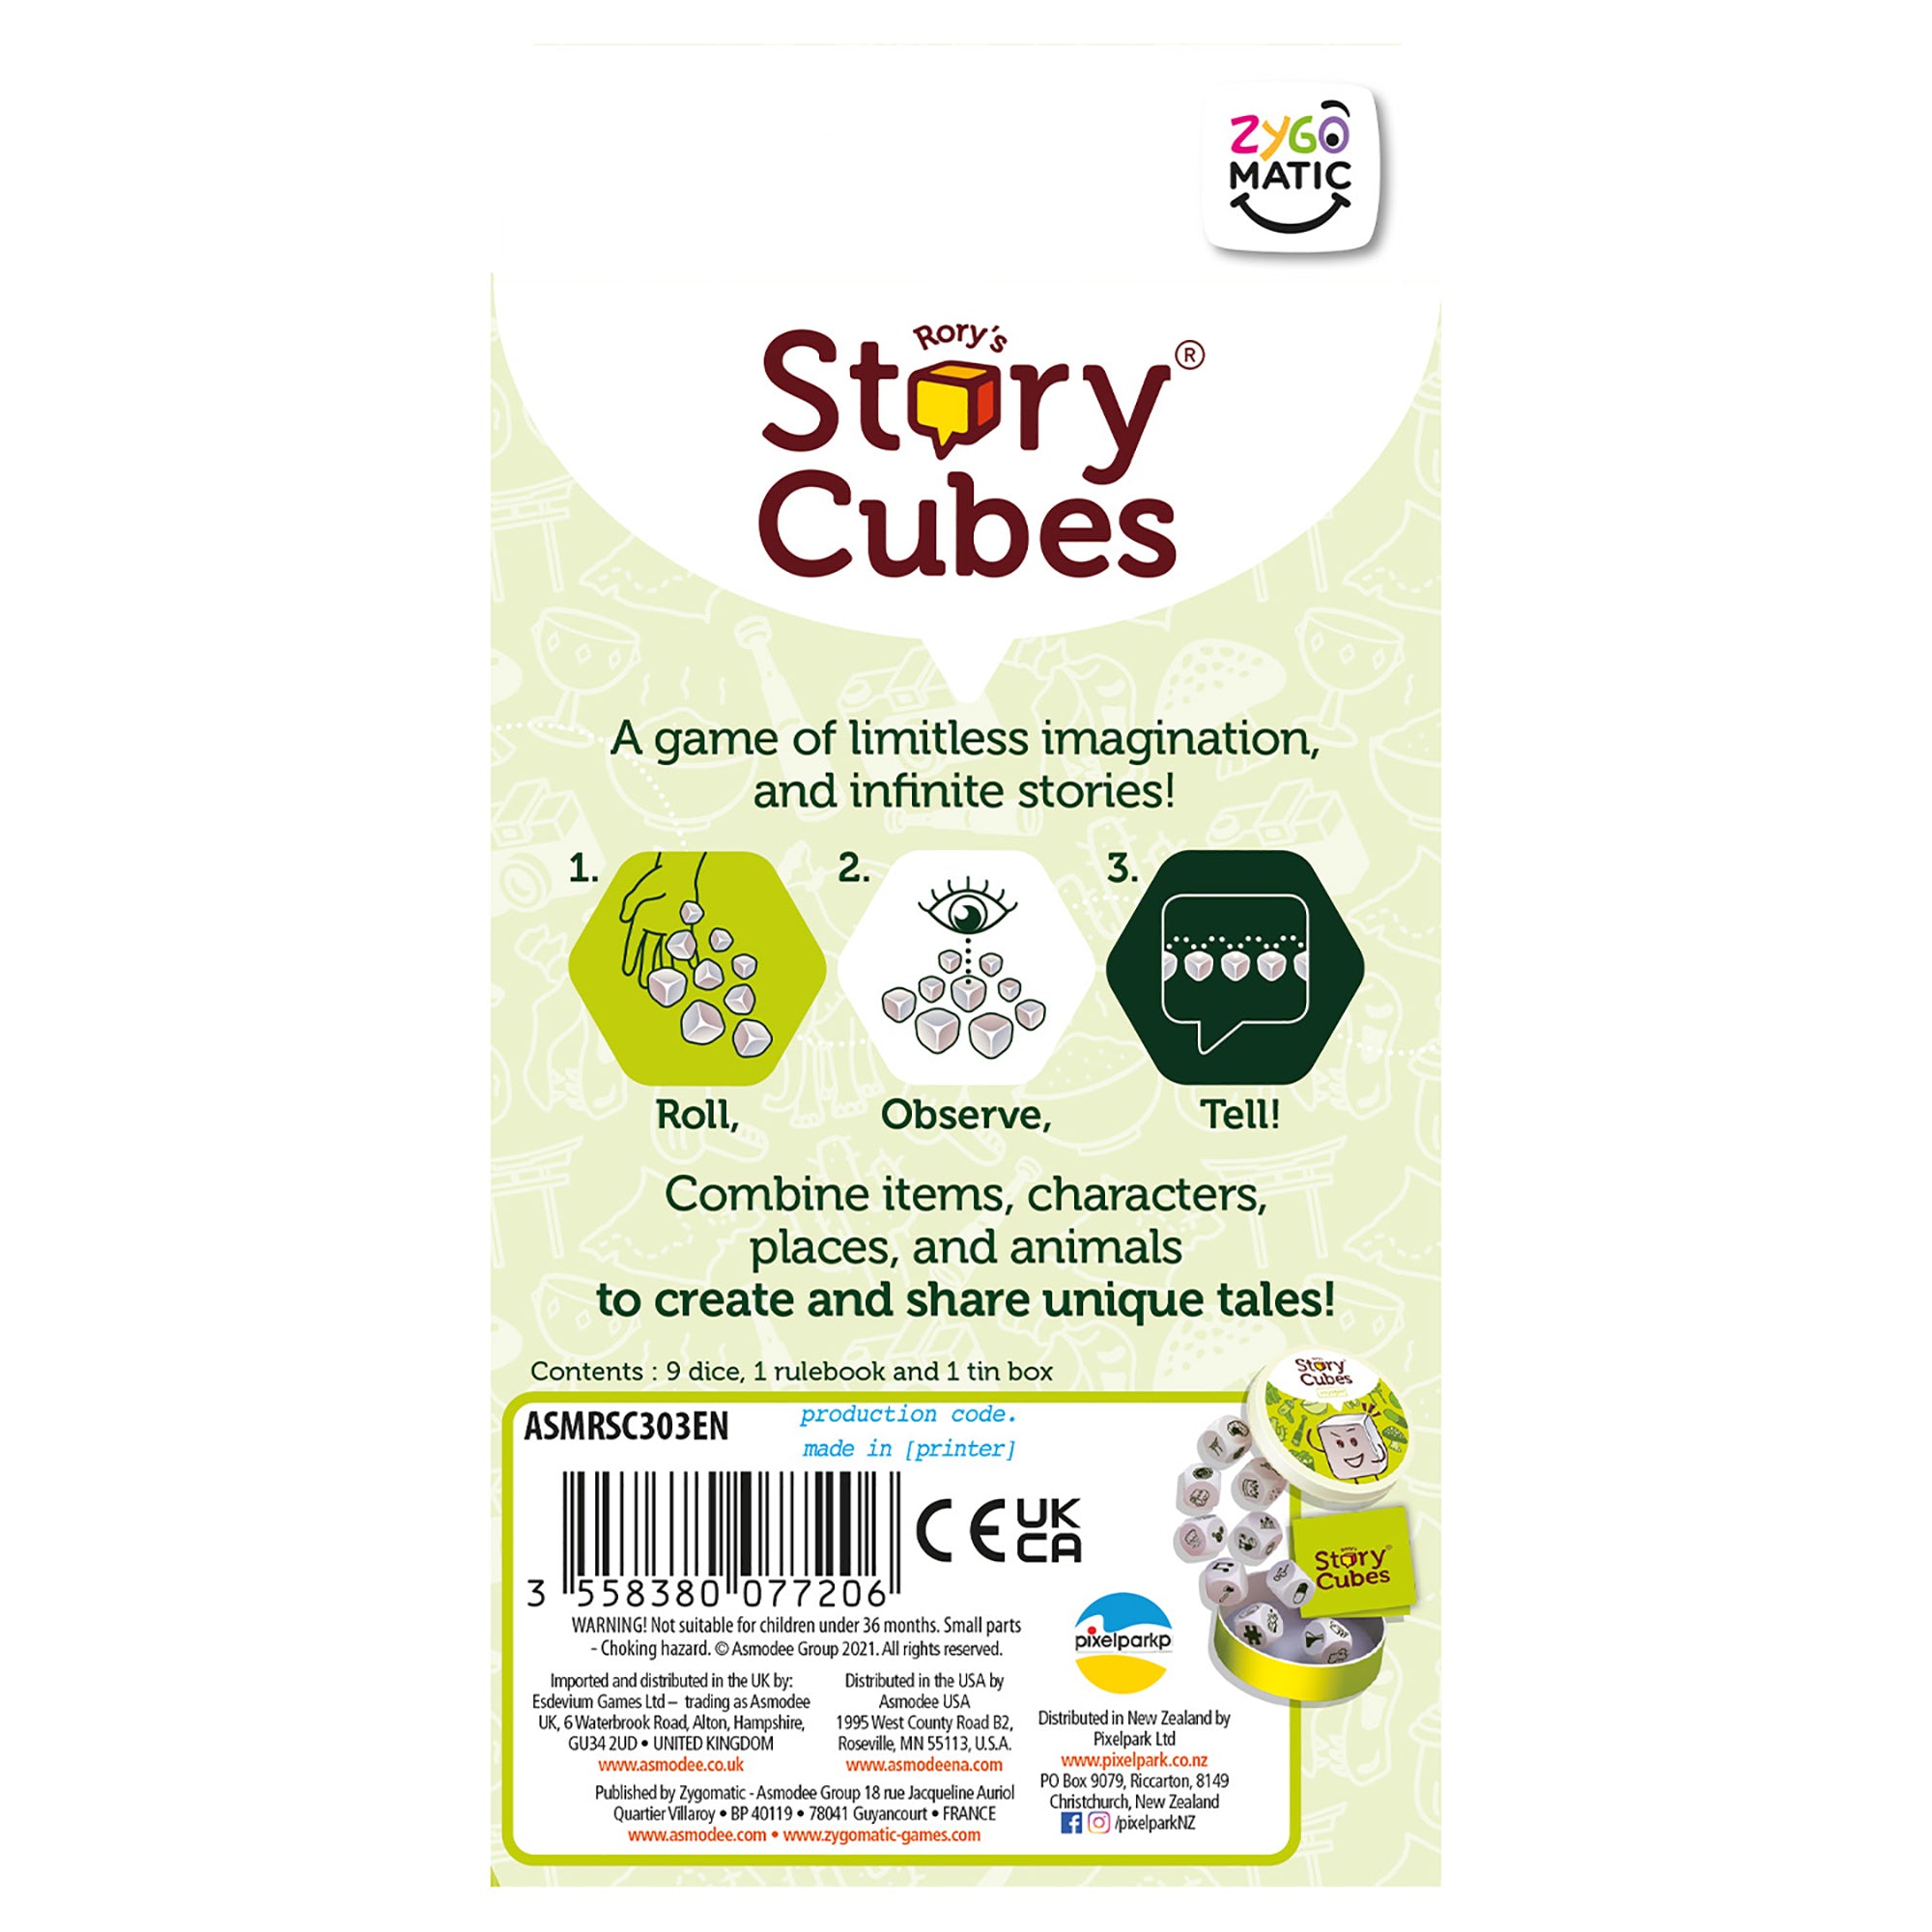 Rory Story Cubes Voyages - Multilingue 6+